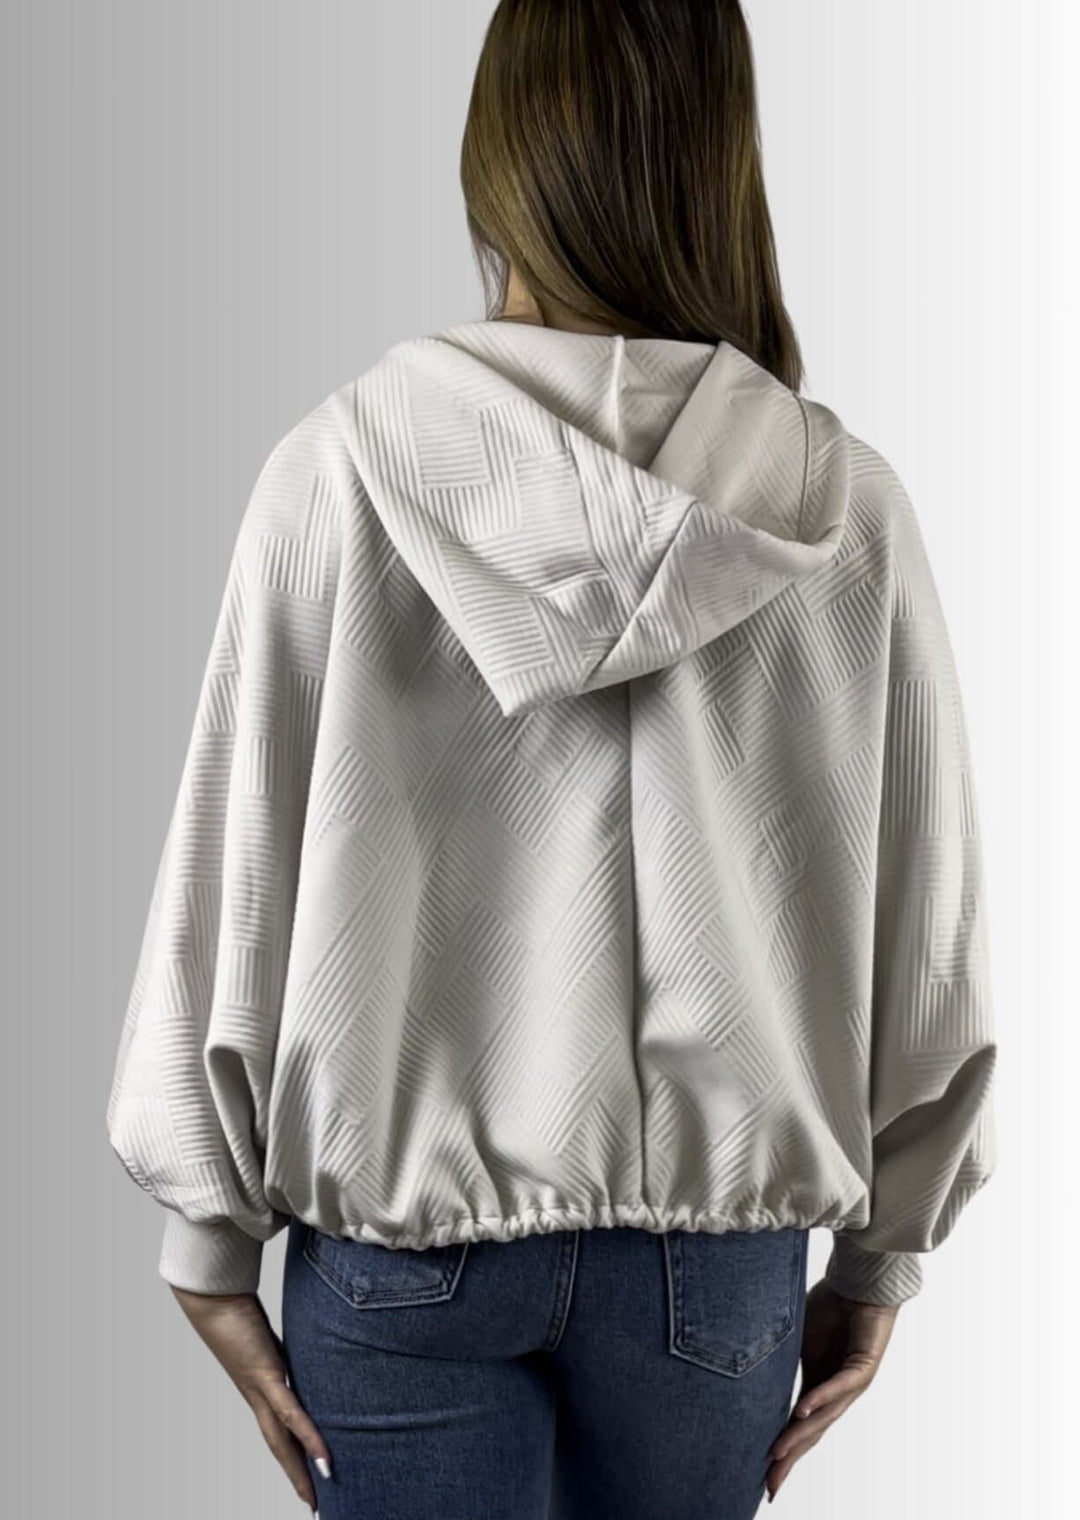 Made in USA Women's Textured Knit Hoodie with Draw string for Hood & at Waist, Button up Collar, Exaggerated Chest Pockets | Bucket List Clothing Style T1890